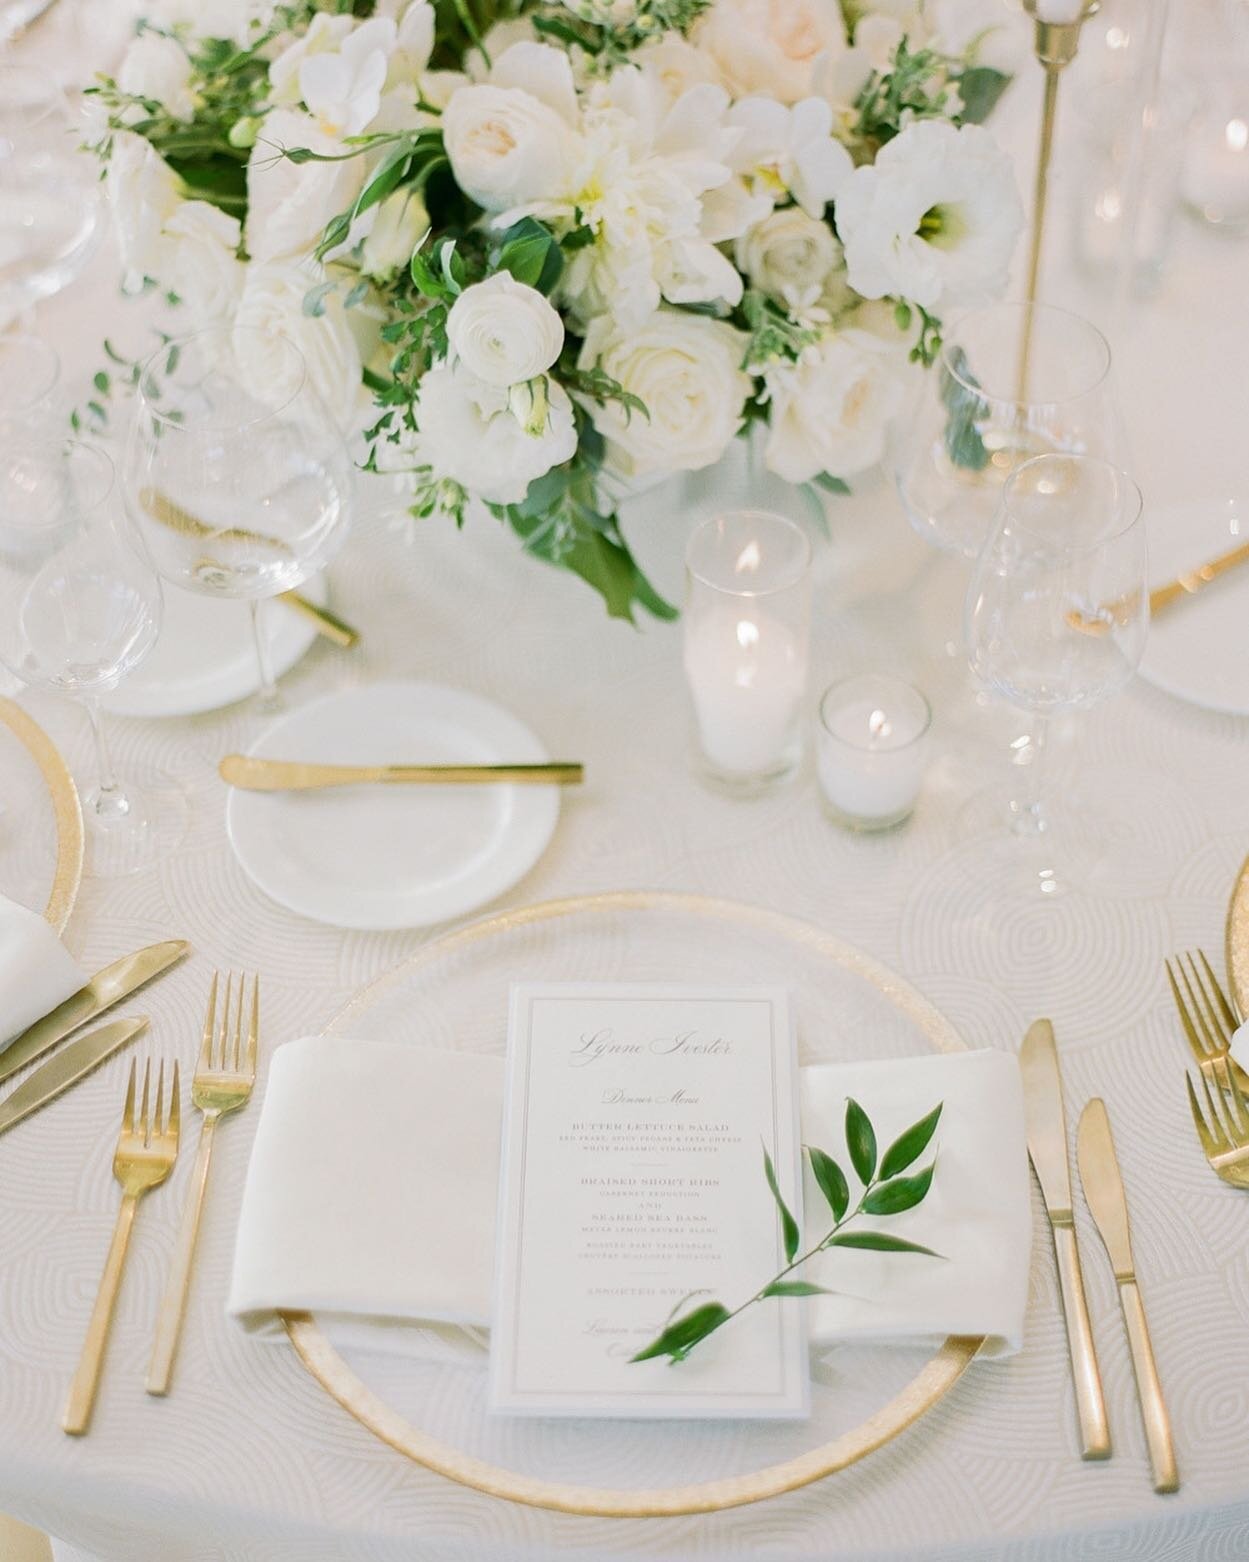 The tablescape of the very last wedding I photographed. It was exactly two weeks before my own wedding last October. Looking forward to photographing so many more of these in 2021.
//
Planning and design: @jbdevents
Photography: @janinelicarephotogra